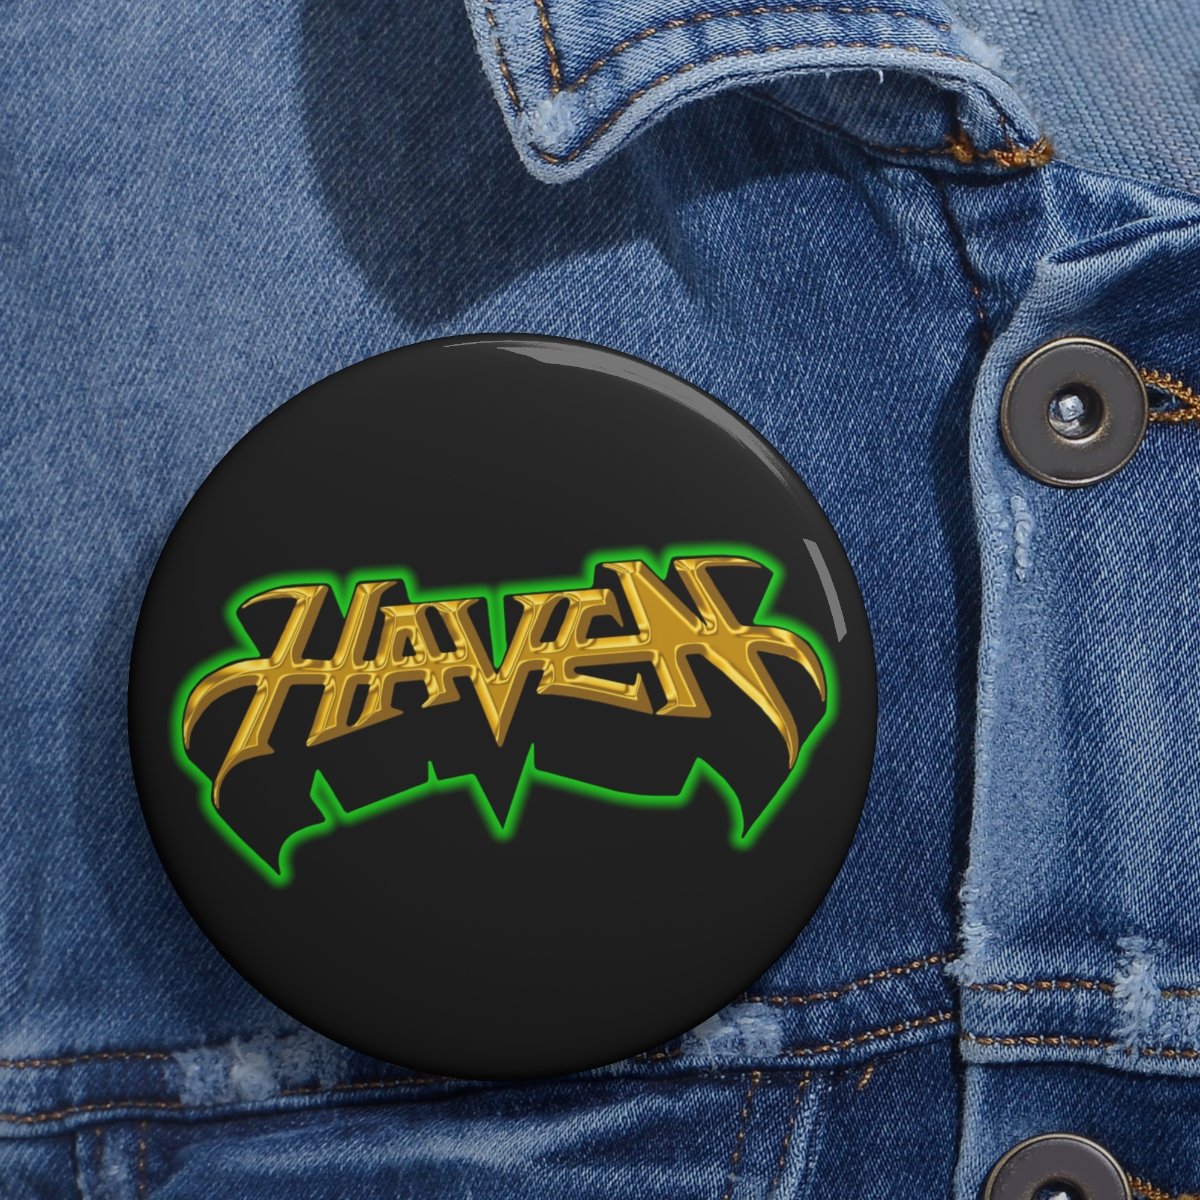 Haven III Logo Pin Buttons